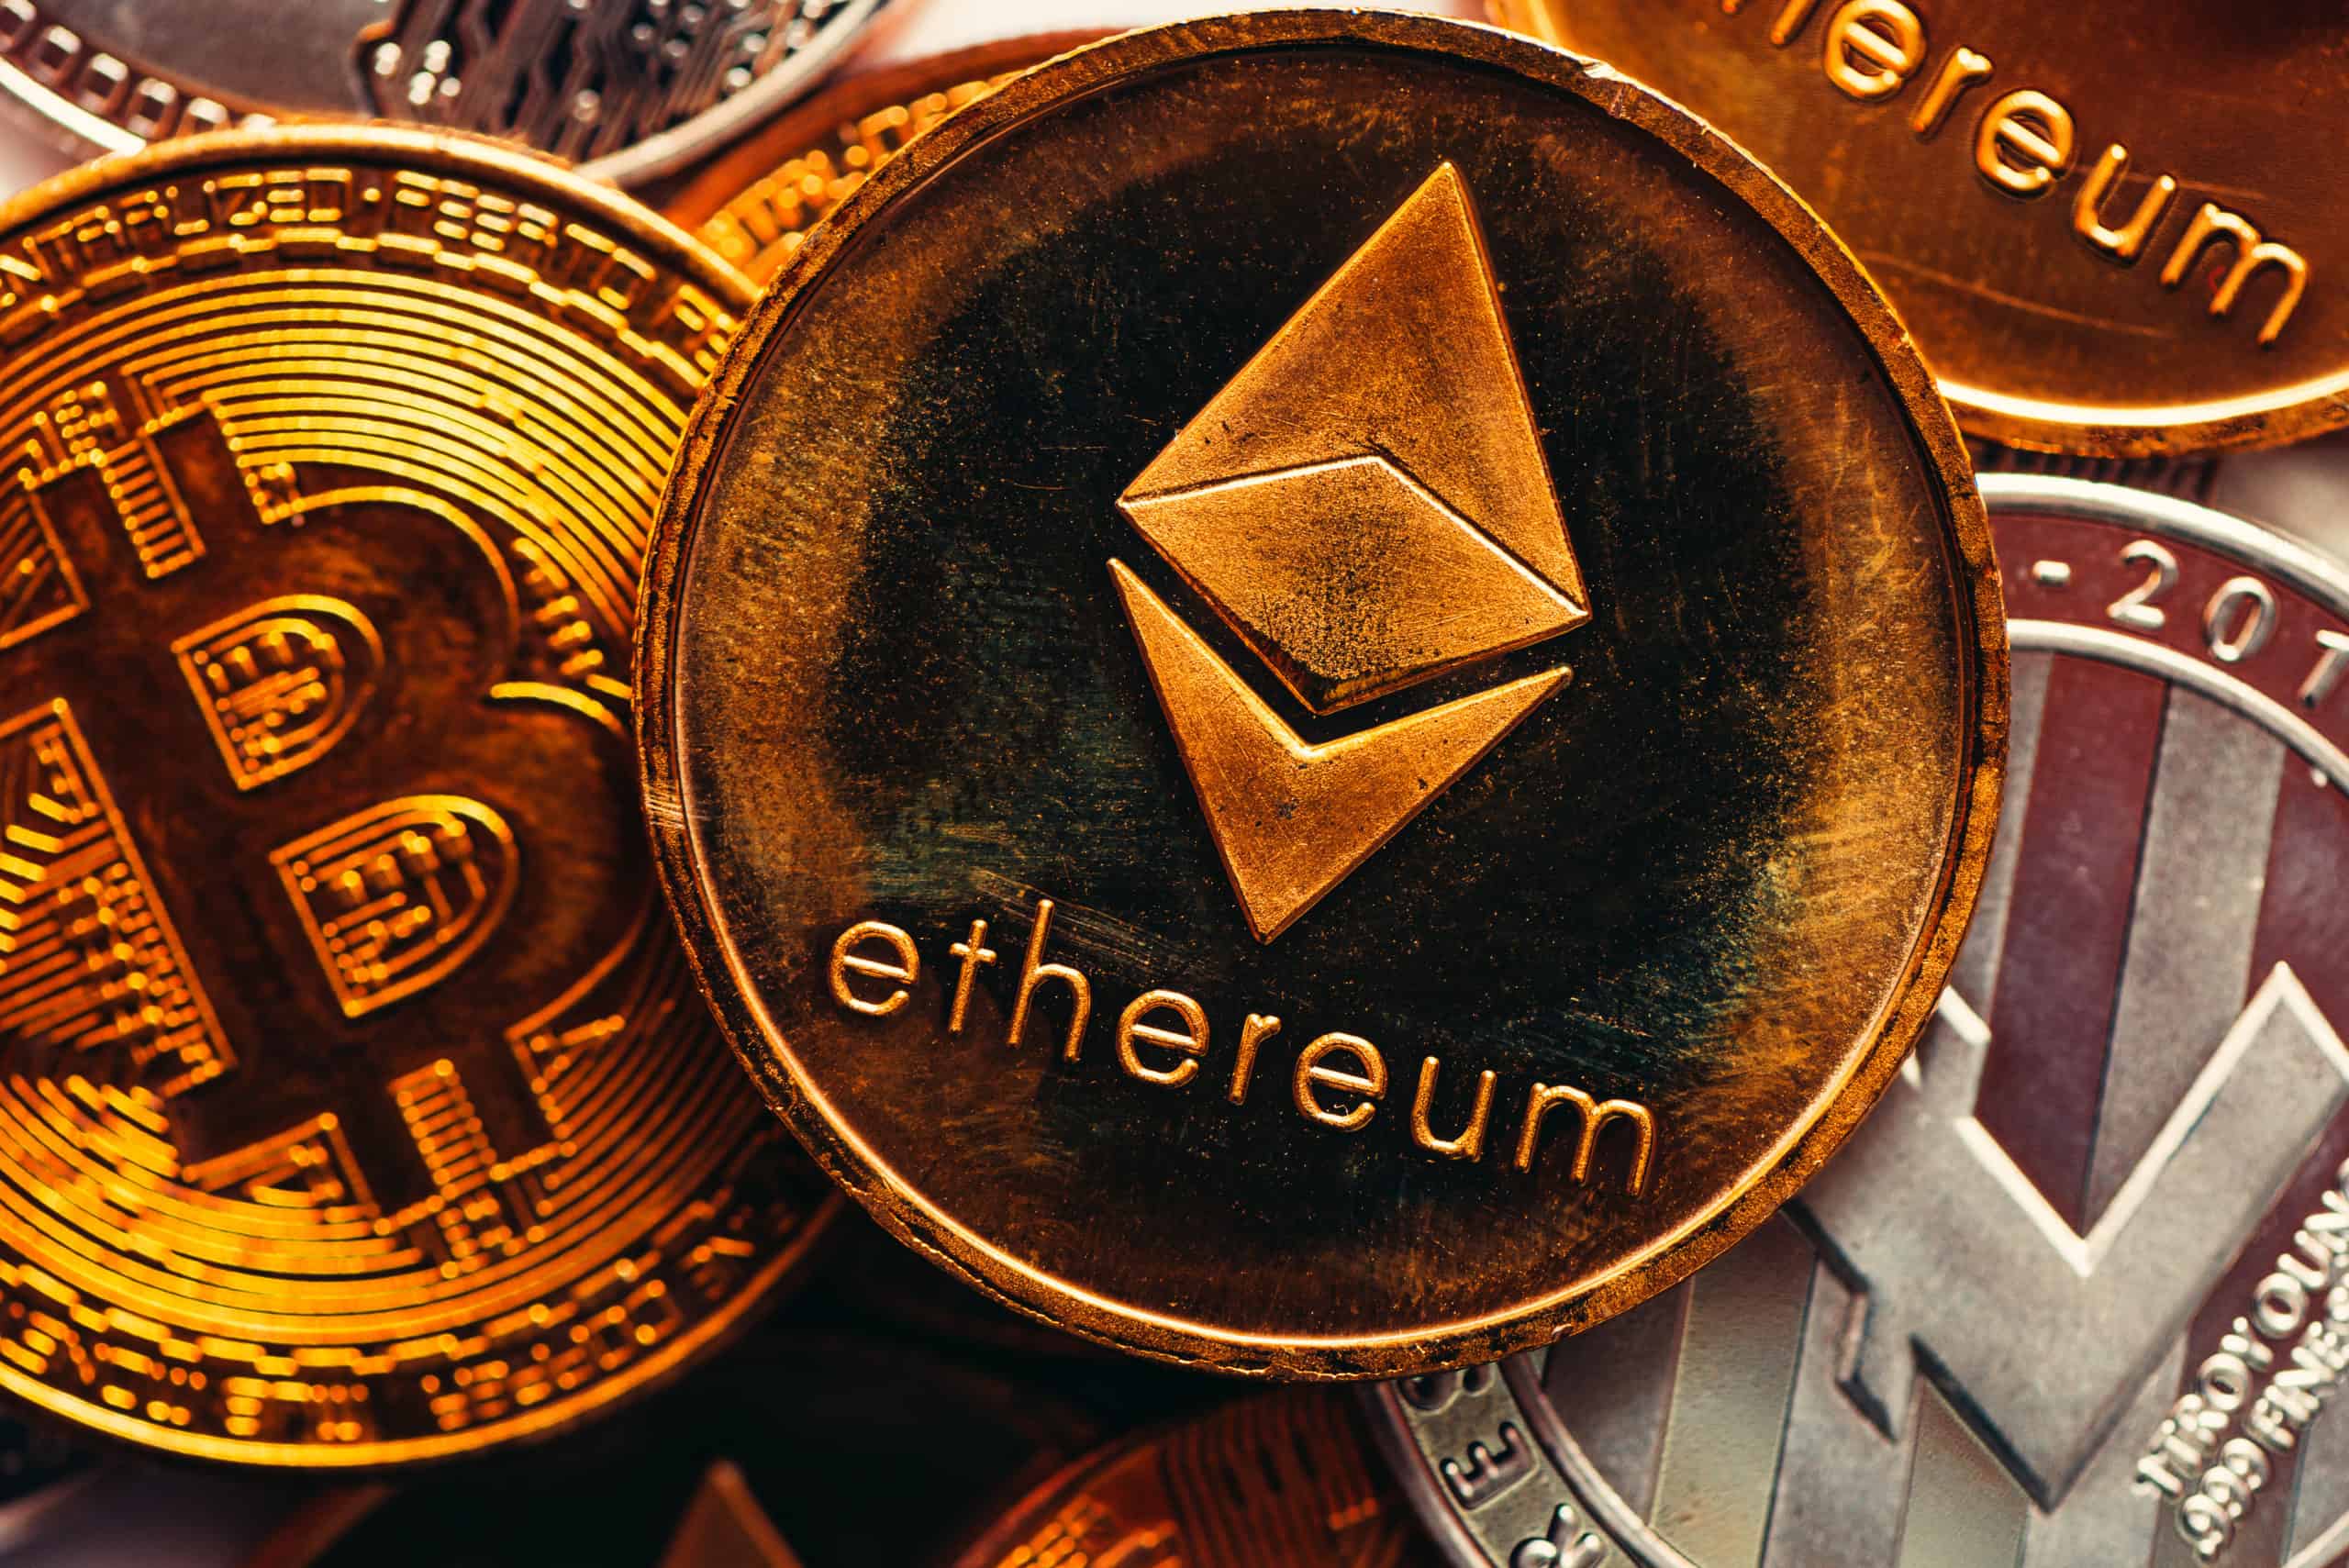 Cryptocurrency cryptocurrency ethereum bitcoin price 2019